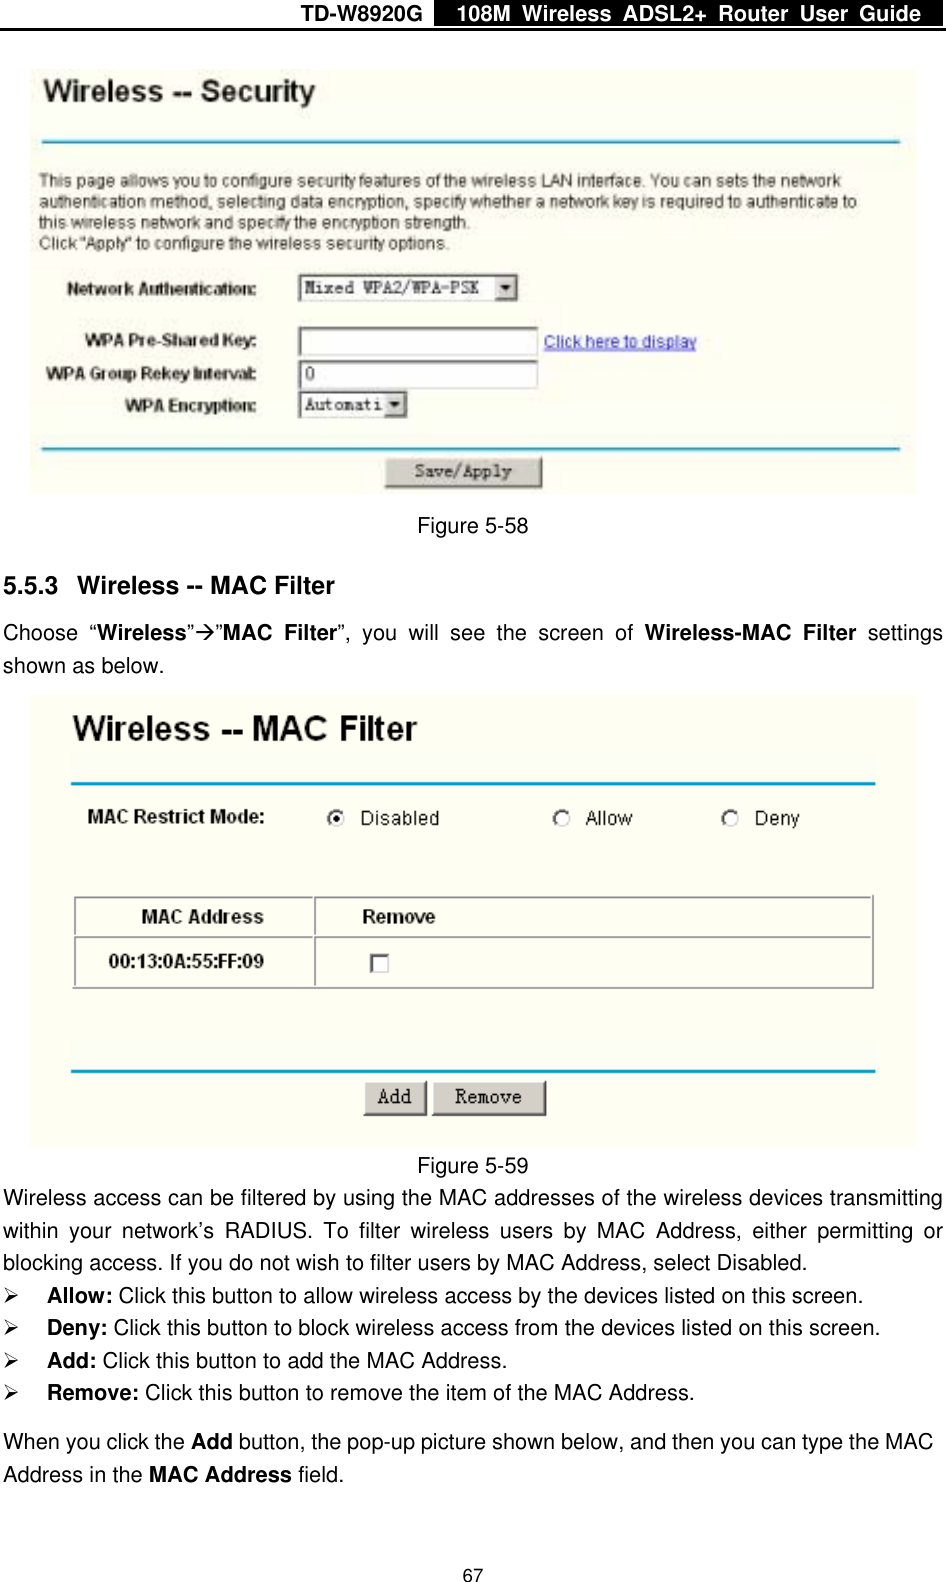 TD-W8920G    108M Wireless ADSL2+ Router User Guide    67 Figure 5-58 5.5.3  Wireless -- MAC Filter Choose “Wireless”Æ”MAC Filter”, you will see the screen of Wireless-MAC Filter settings shown as below.  Figure 5-59 Wireless access can be filtered by using the MAC addresses of the wireless devices transmitting within your network’s RADIUS. To filter wireless users by MAC Address, either permitting or blocking access. If you do not wish to filter users by MAC Address, select Disabled. ¾ Allow: Click this button to allow wireless access by the devices listed on this screen. ¾ Deny: Click this button to block wireless access from the devices listed on this screen. ¾ Add: Click this button to add the MAC Address. ¾ Remove: Click this button to remove the item of the MAC Address. When you click the Add button, the pop-up picture shown below, and then you can type the MAC Address in the MAC Address field.  